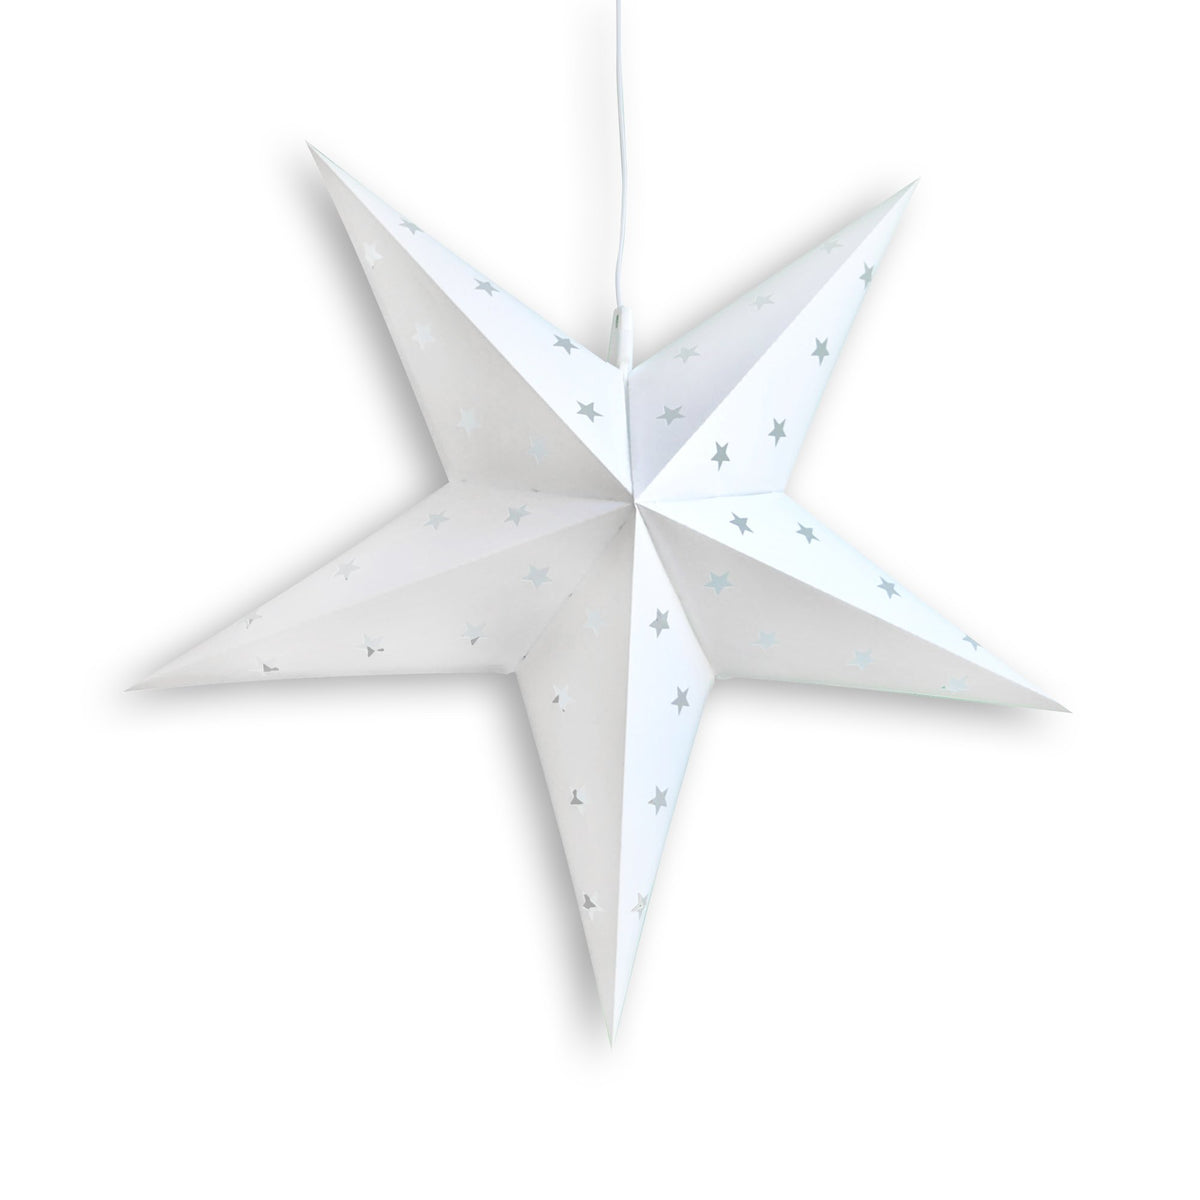 19&quot; White Weatherproof Star Lantern Lamp, Hanging Decoration (Shade Only)